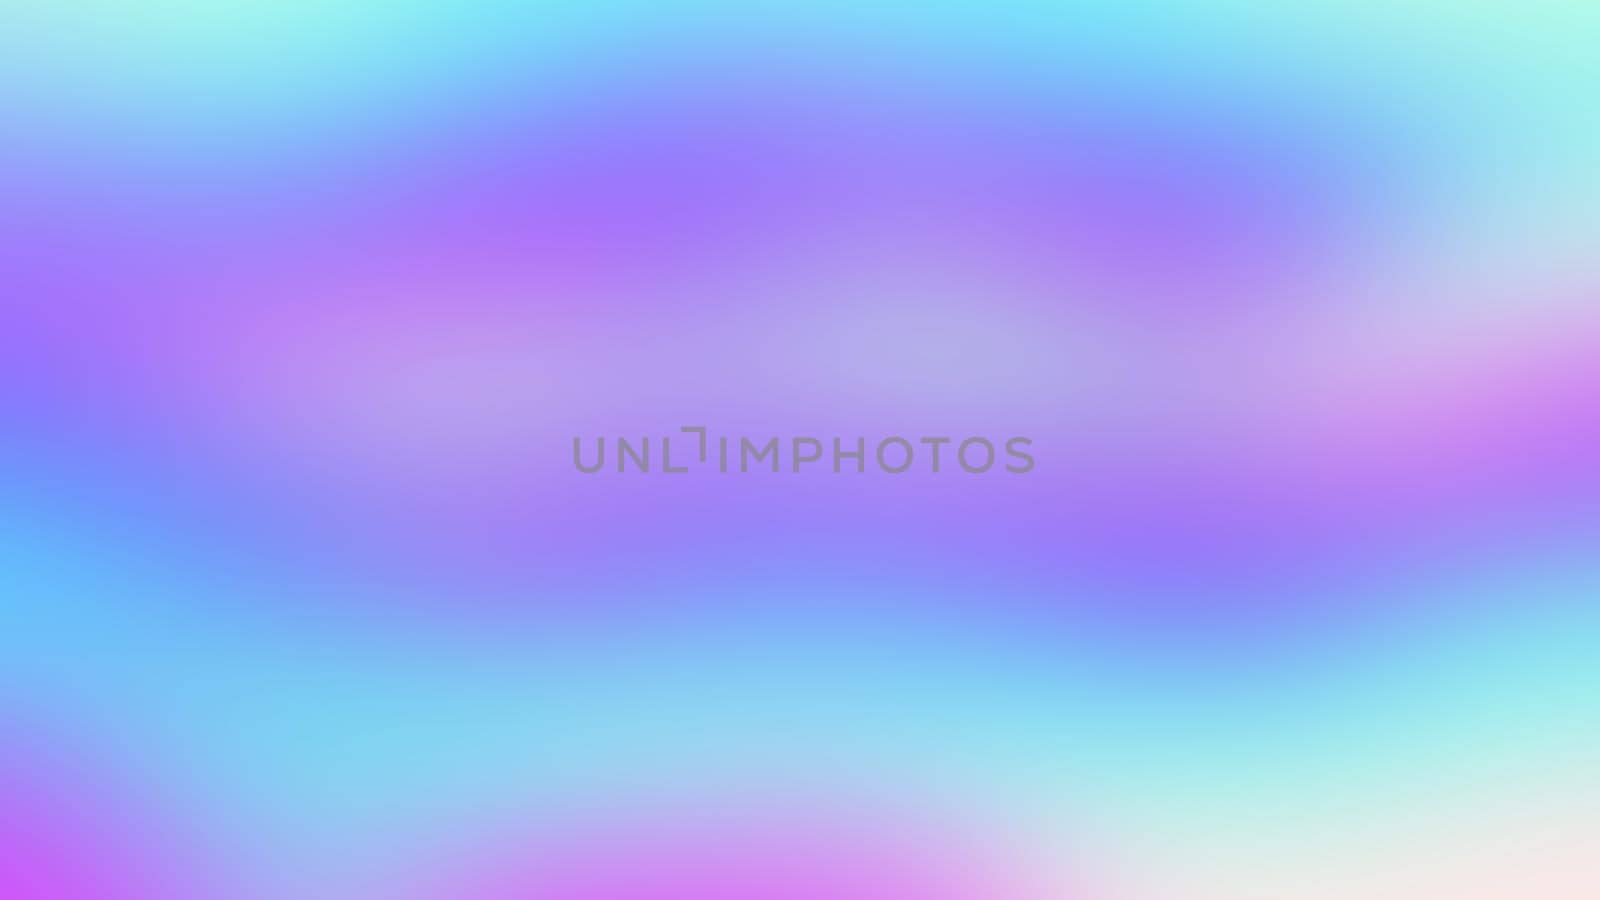 Bright multicolor gradient background or texture. With lilac purple turquoise yellow color.